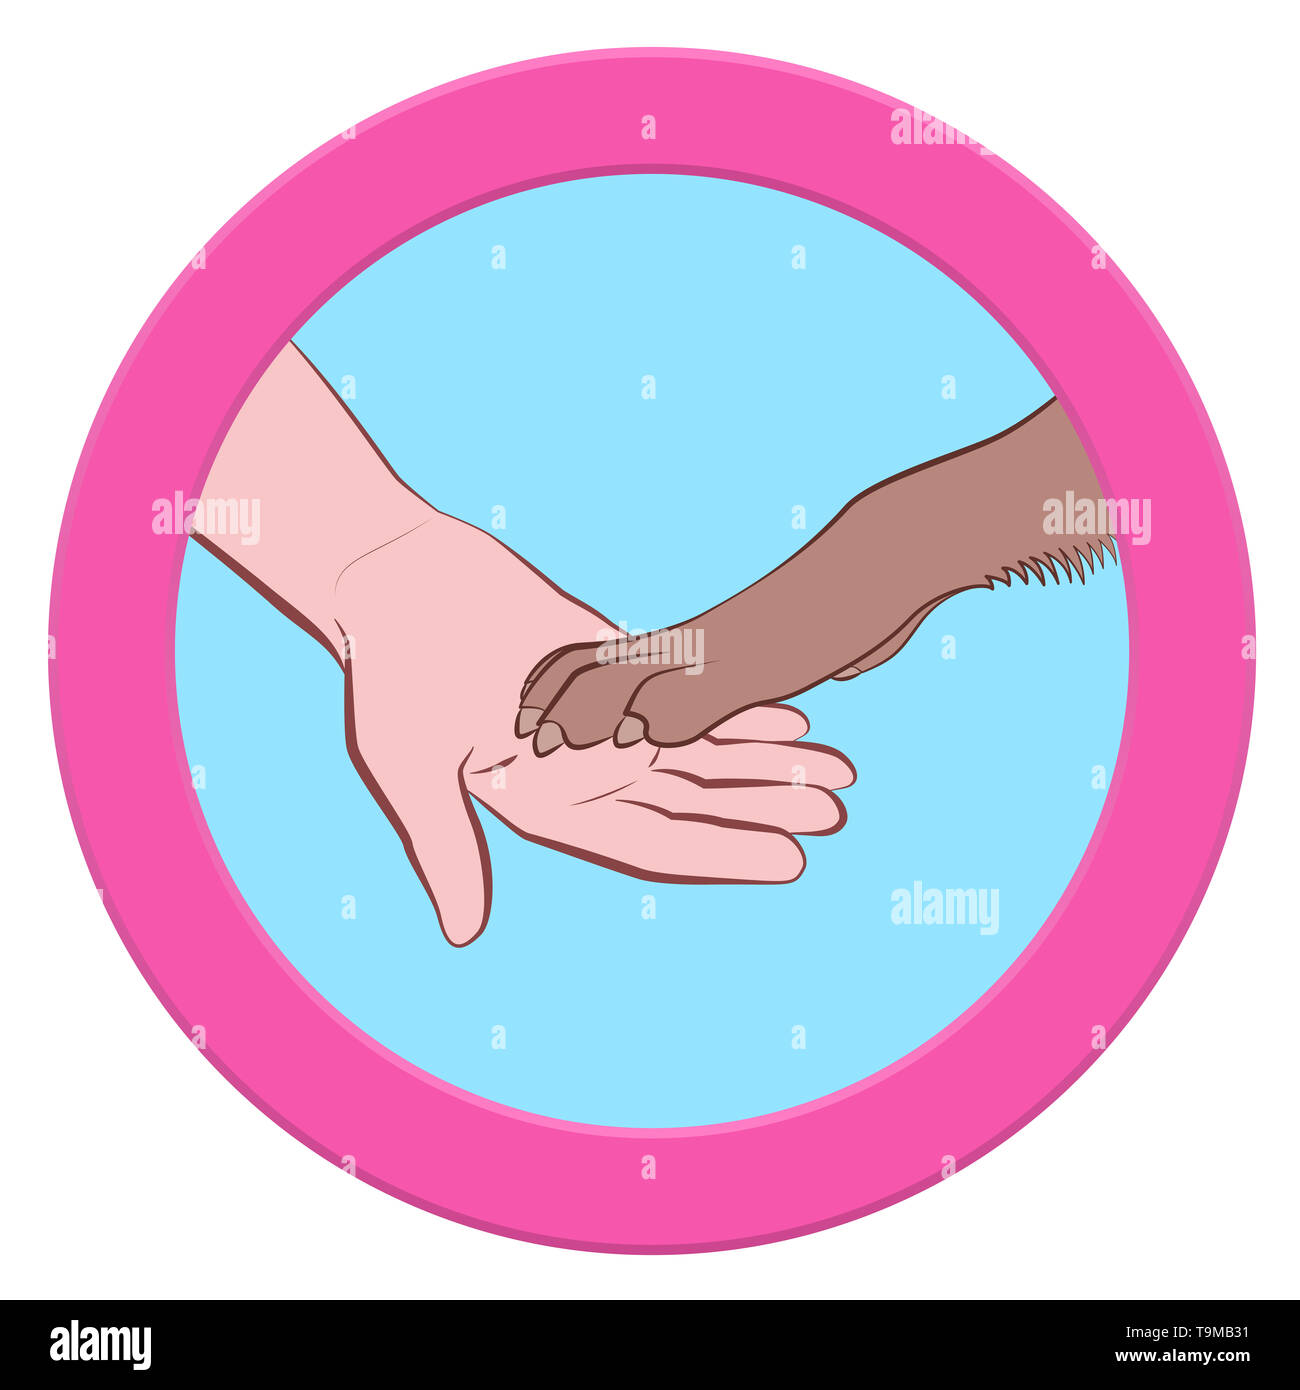 Dogs paw and human hand giving paws. Round pink logo symbol illustration on white background. Stock Photo